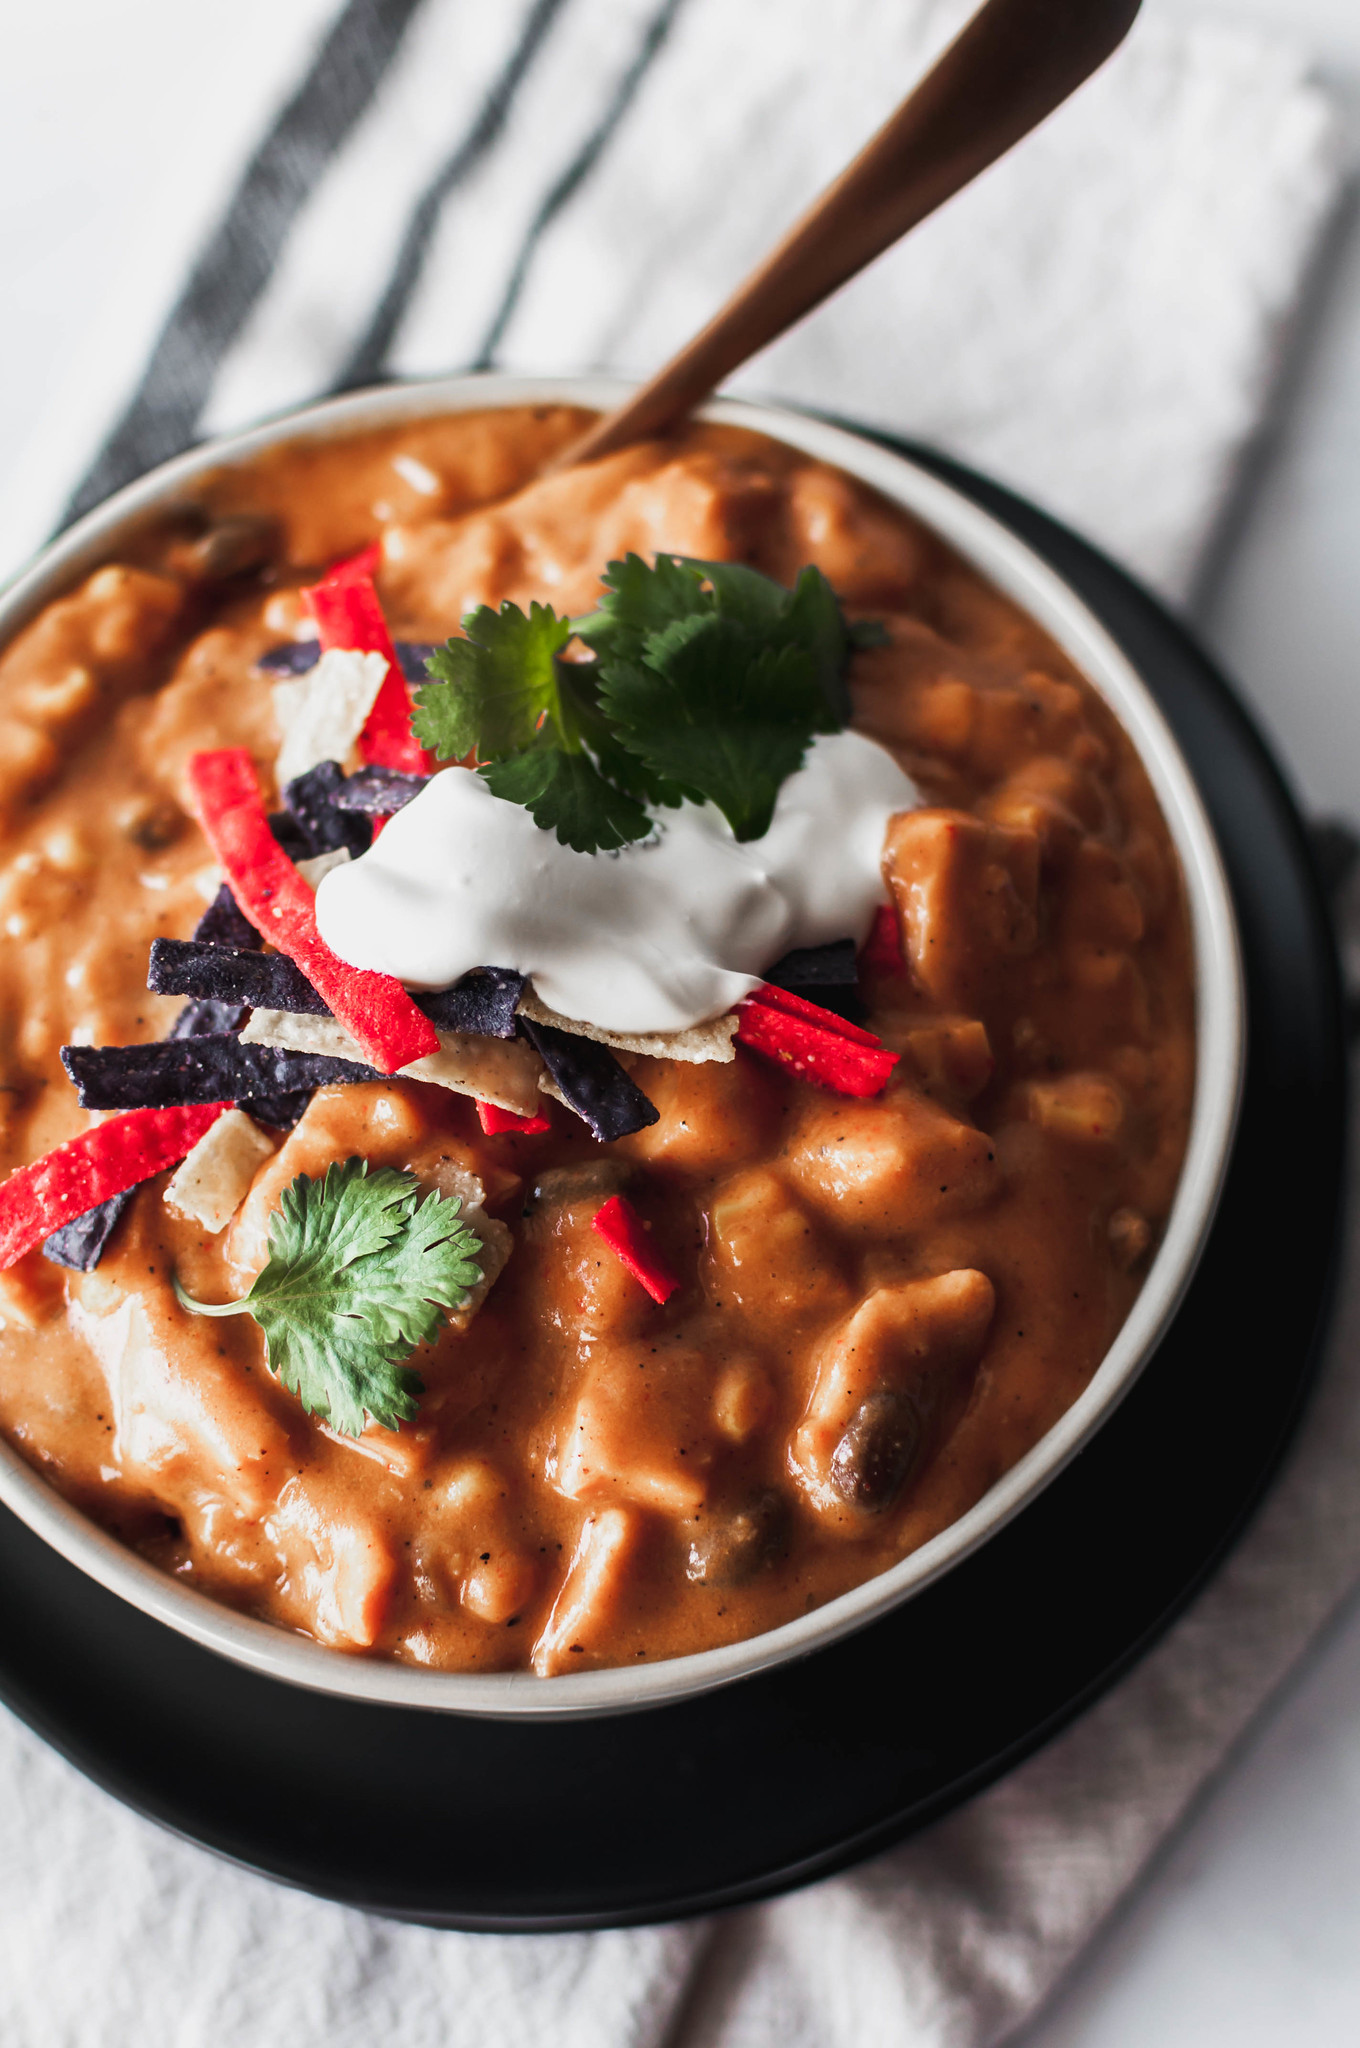 Chicken Enchilada Soup is creamy, spicy and packed full of enchilada flavor. The perfect slow cooker soup for fall.